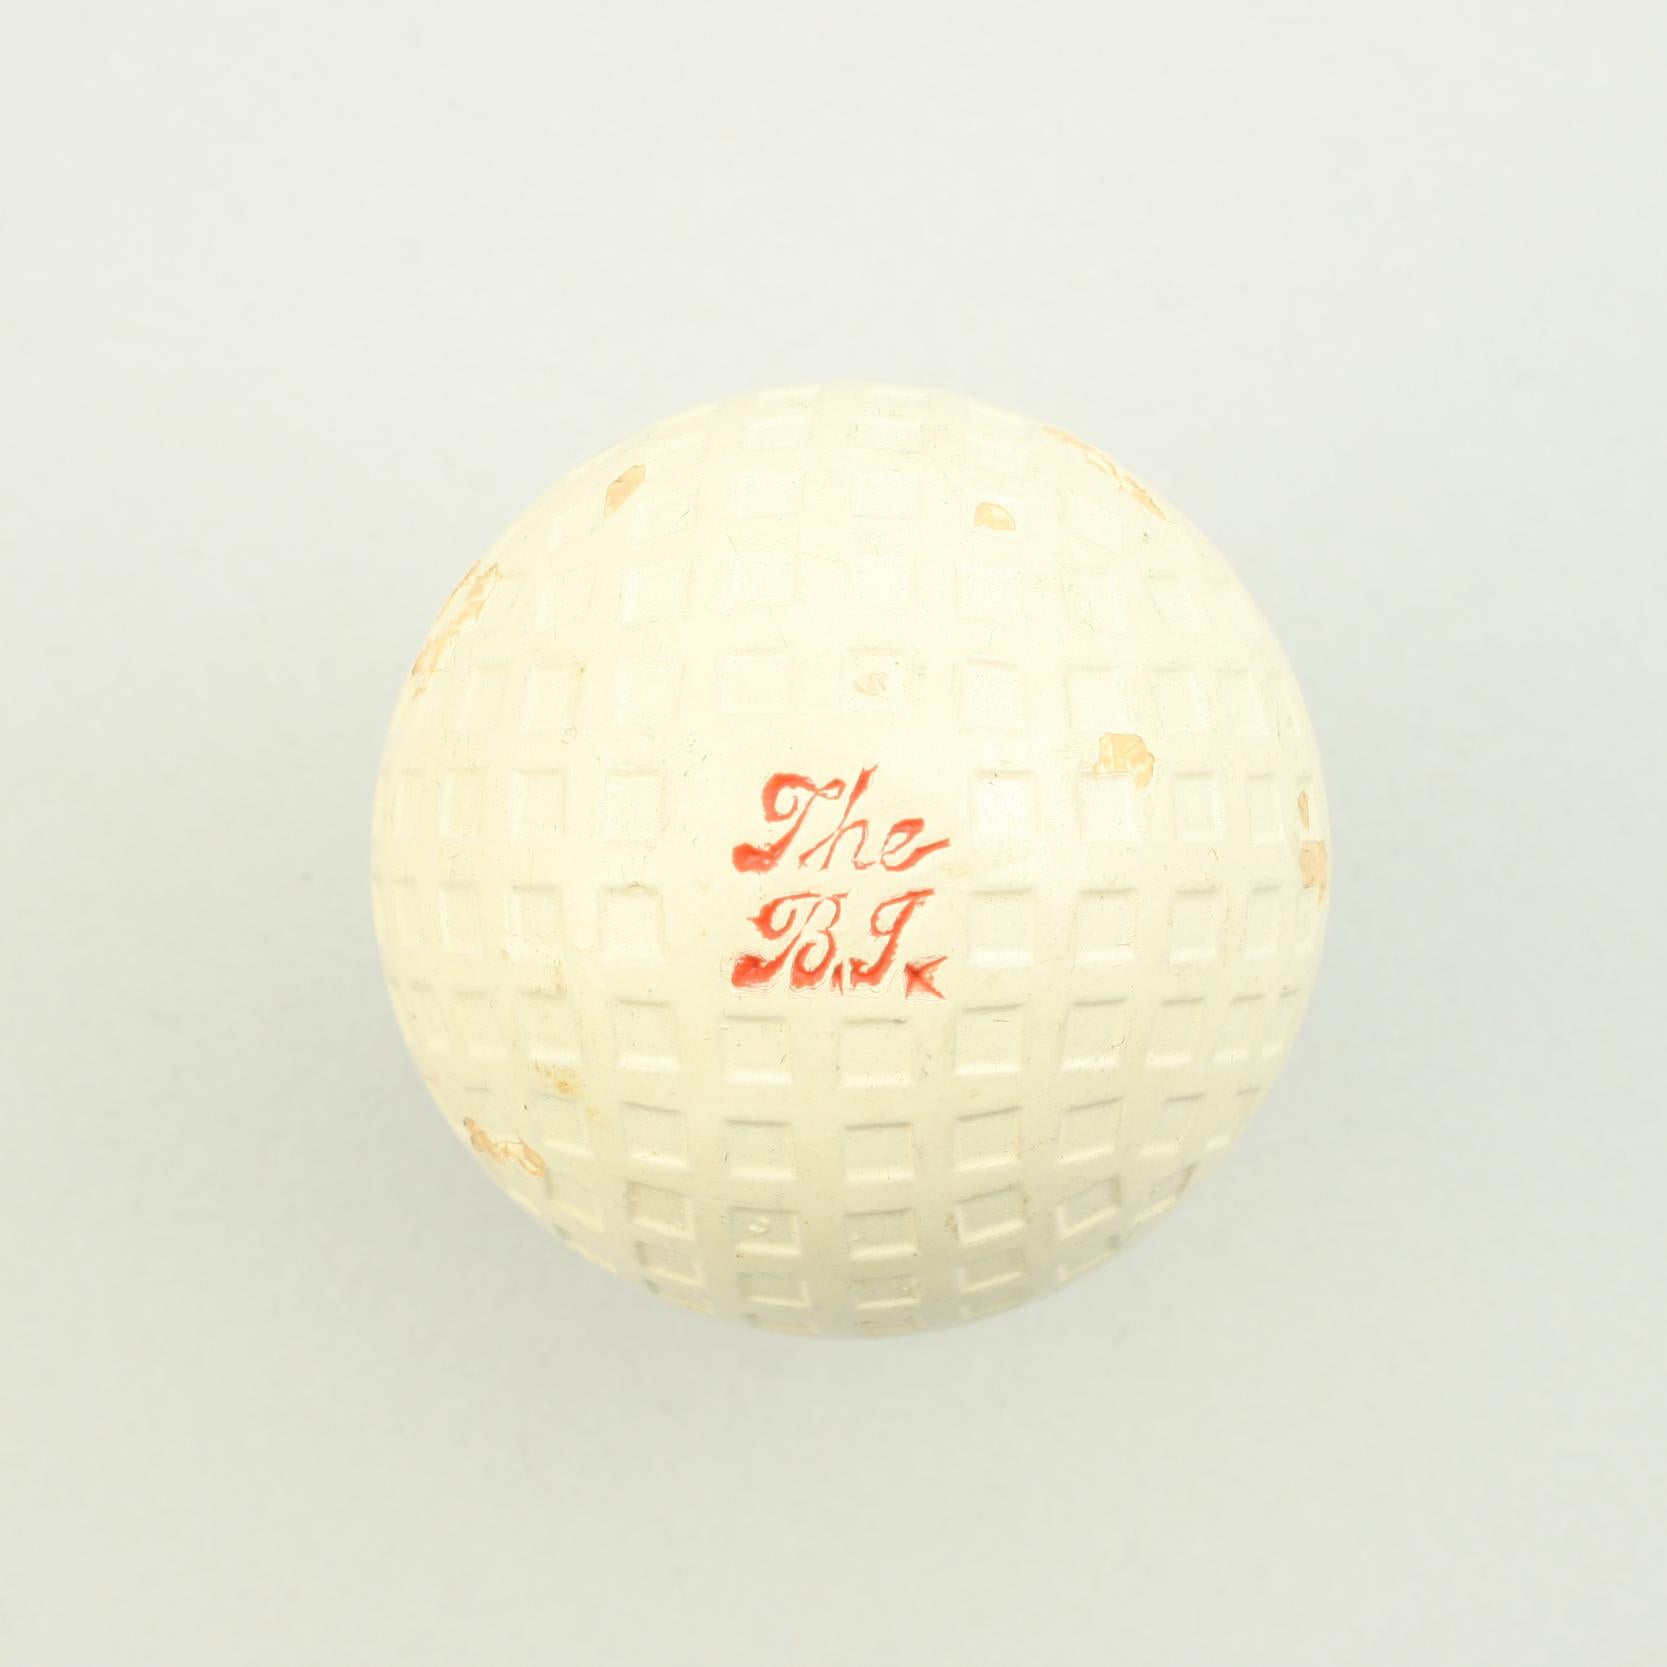 Antique Mint Condition Mesh Patterned 'B.I' Golf Ball.

This is an exceptional golf ball in near mint condition, never been used and still with its original wrapper. The 1910's mesh or lattice pattern golf ball was manufactured by British